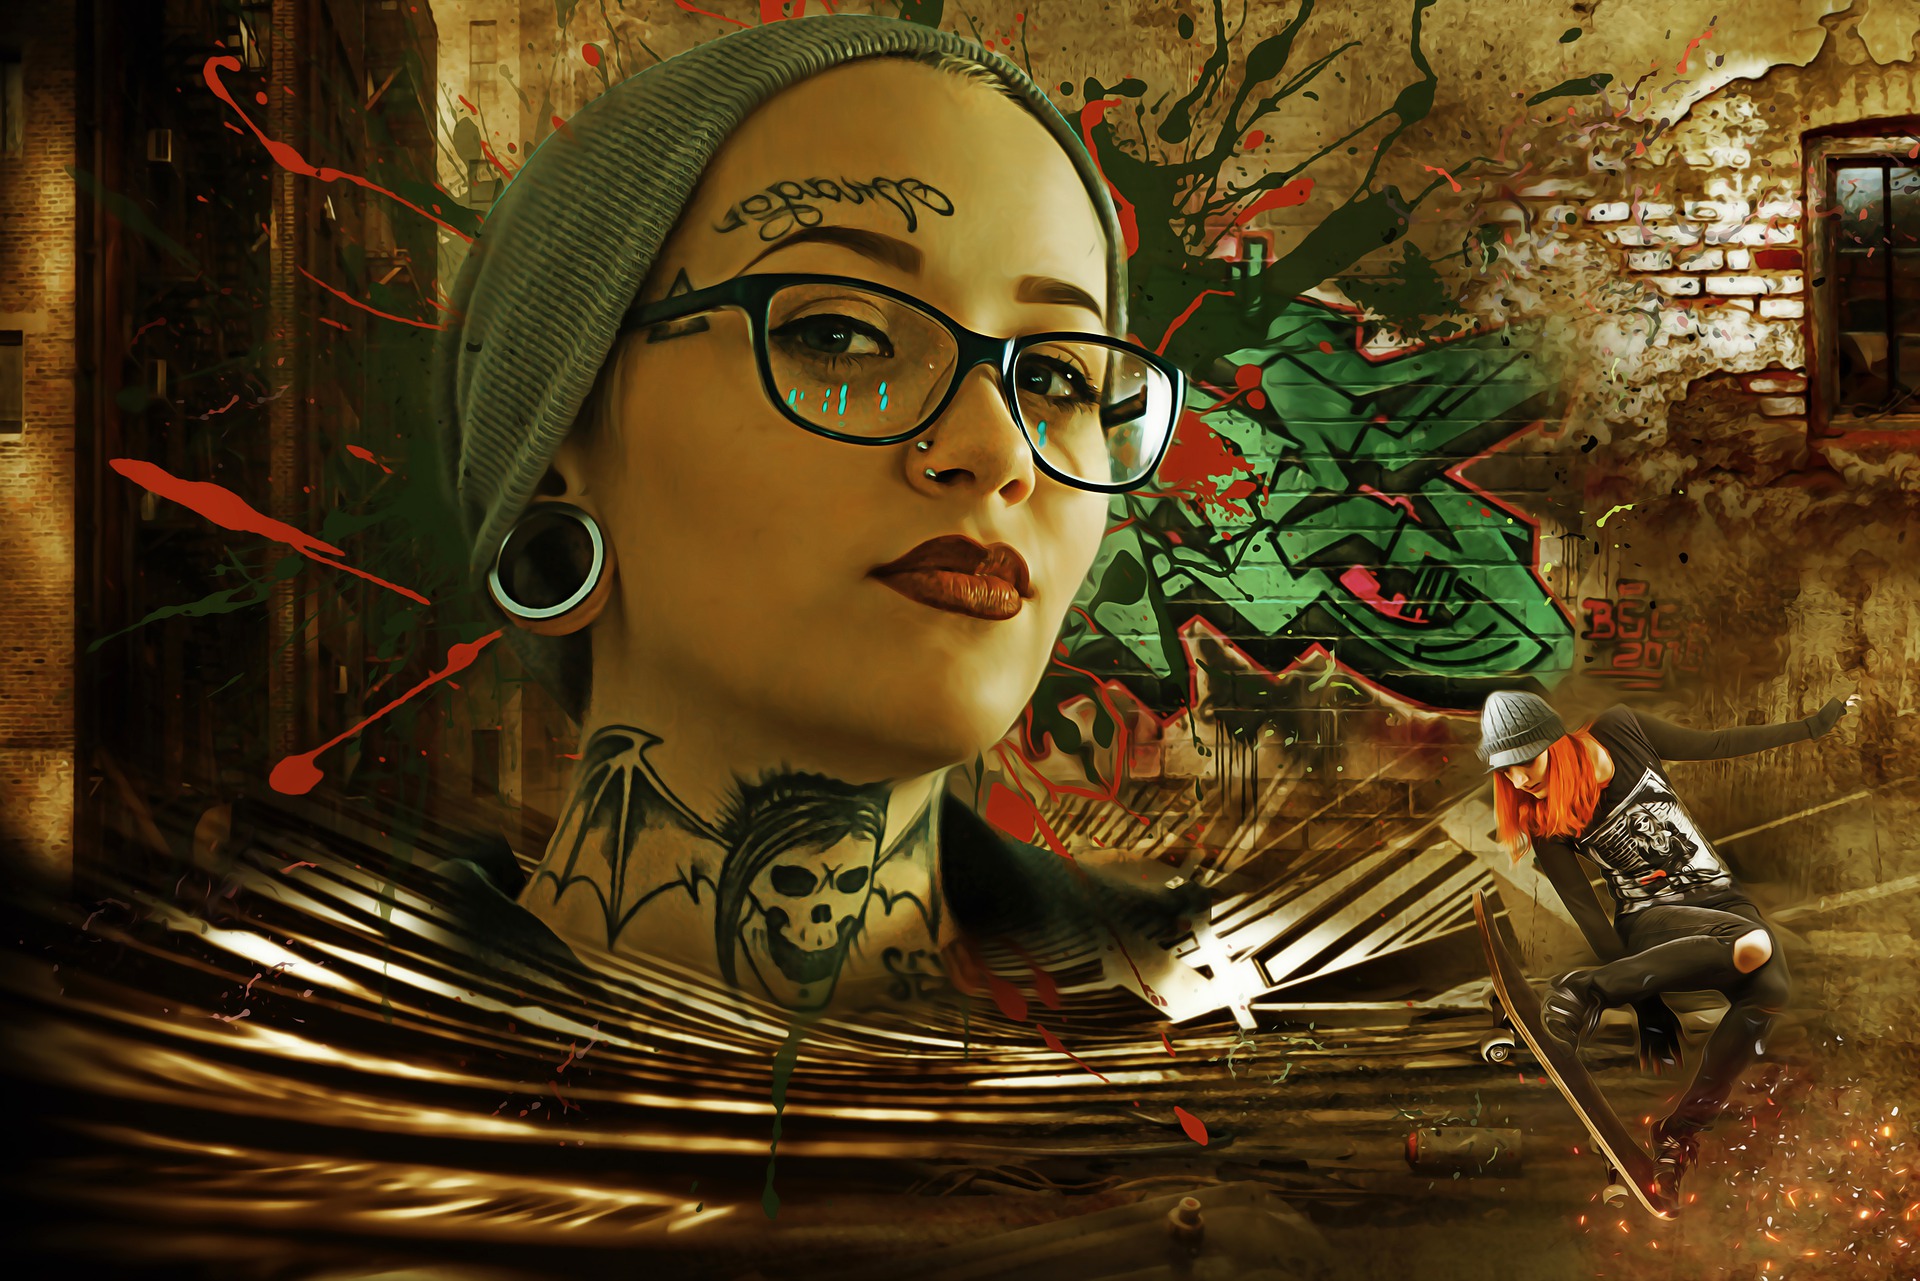 A female with multiple piercings and stretched ears against an urban style background.